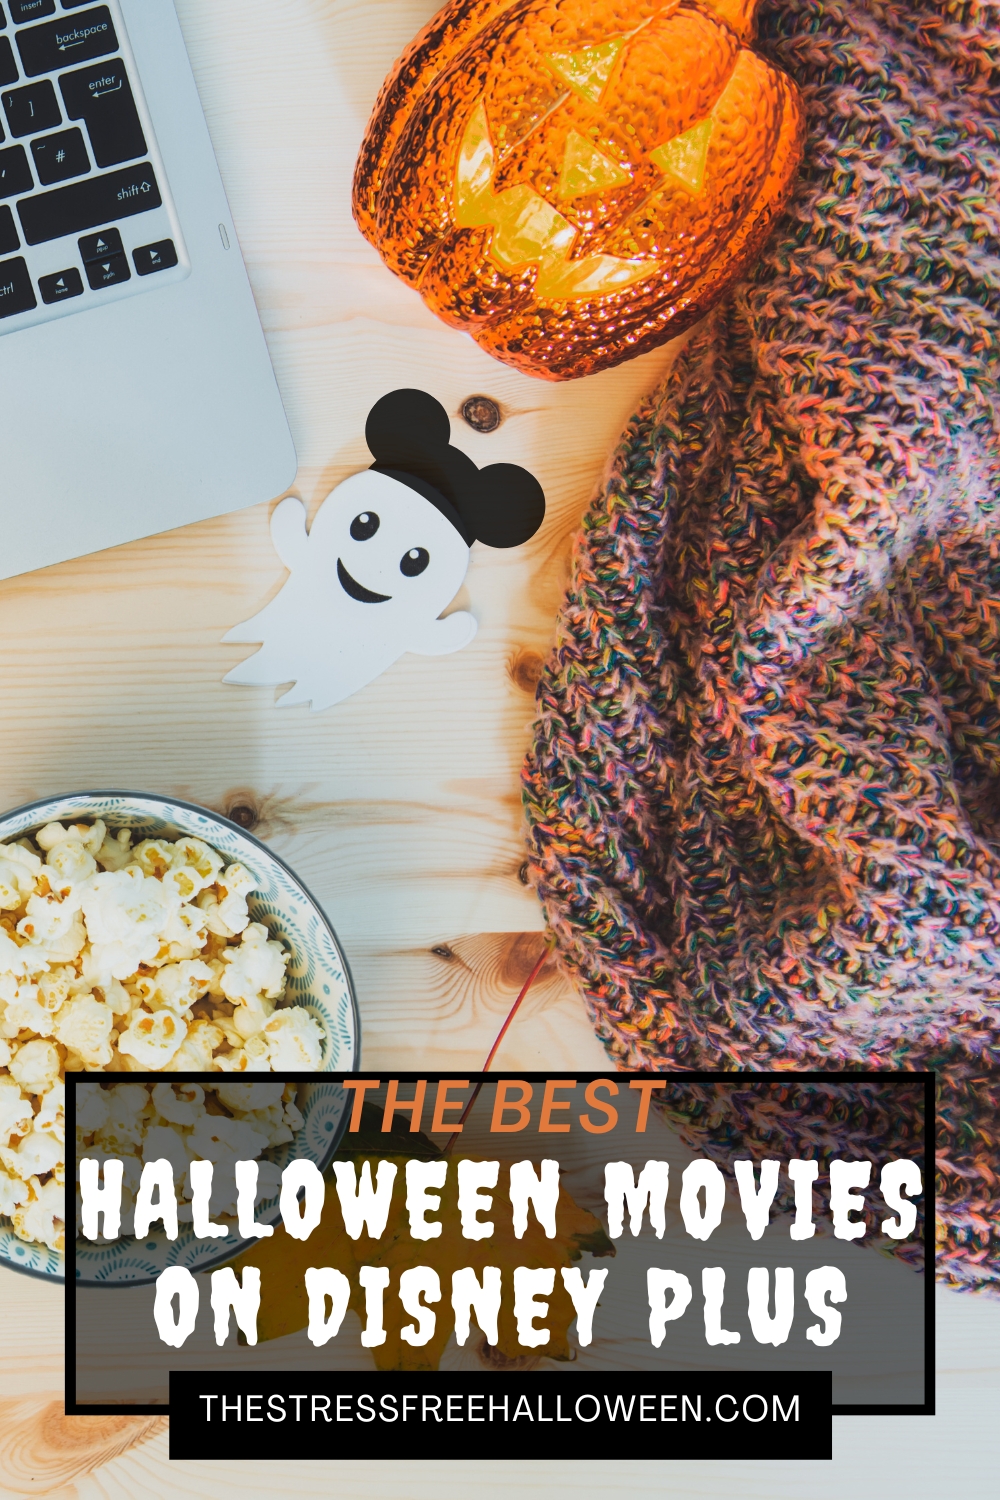 desk with laptop, popcorn, blanket, pumpkin, and a little ghost wearing a mickey hat with text the best Halloween movies on disney plus